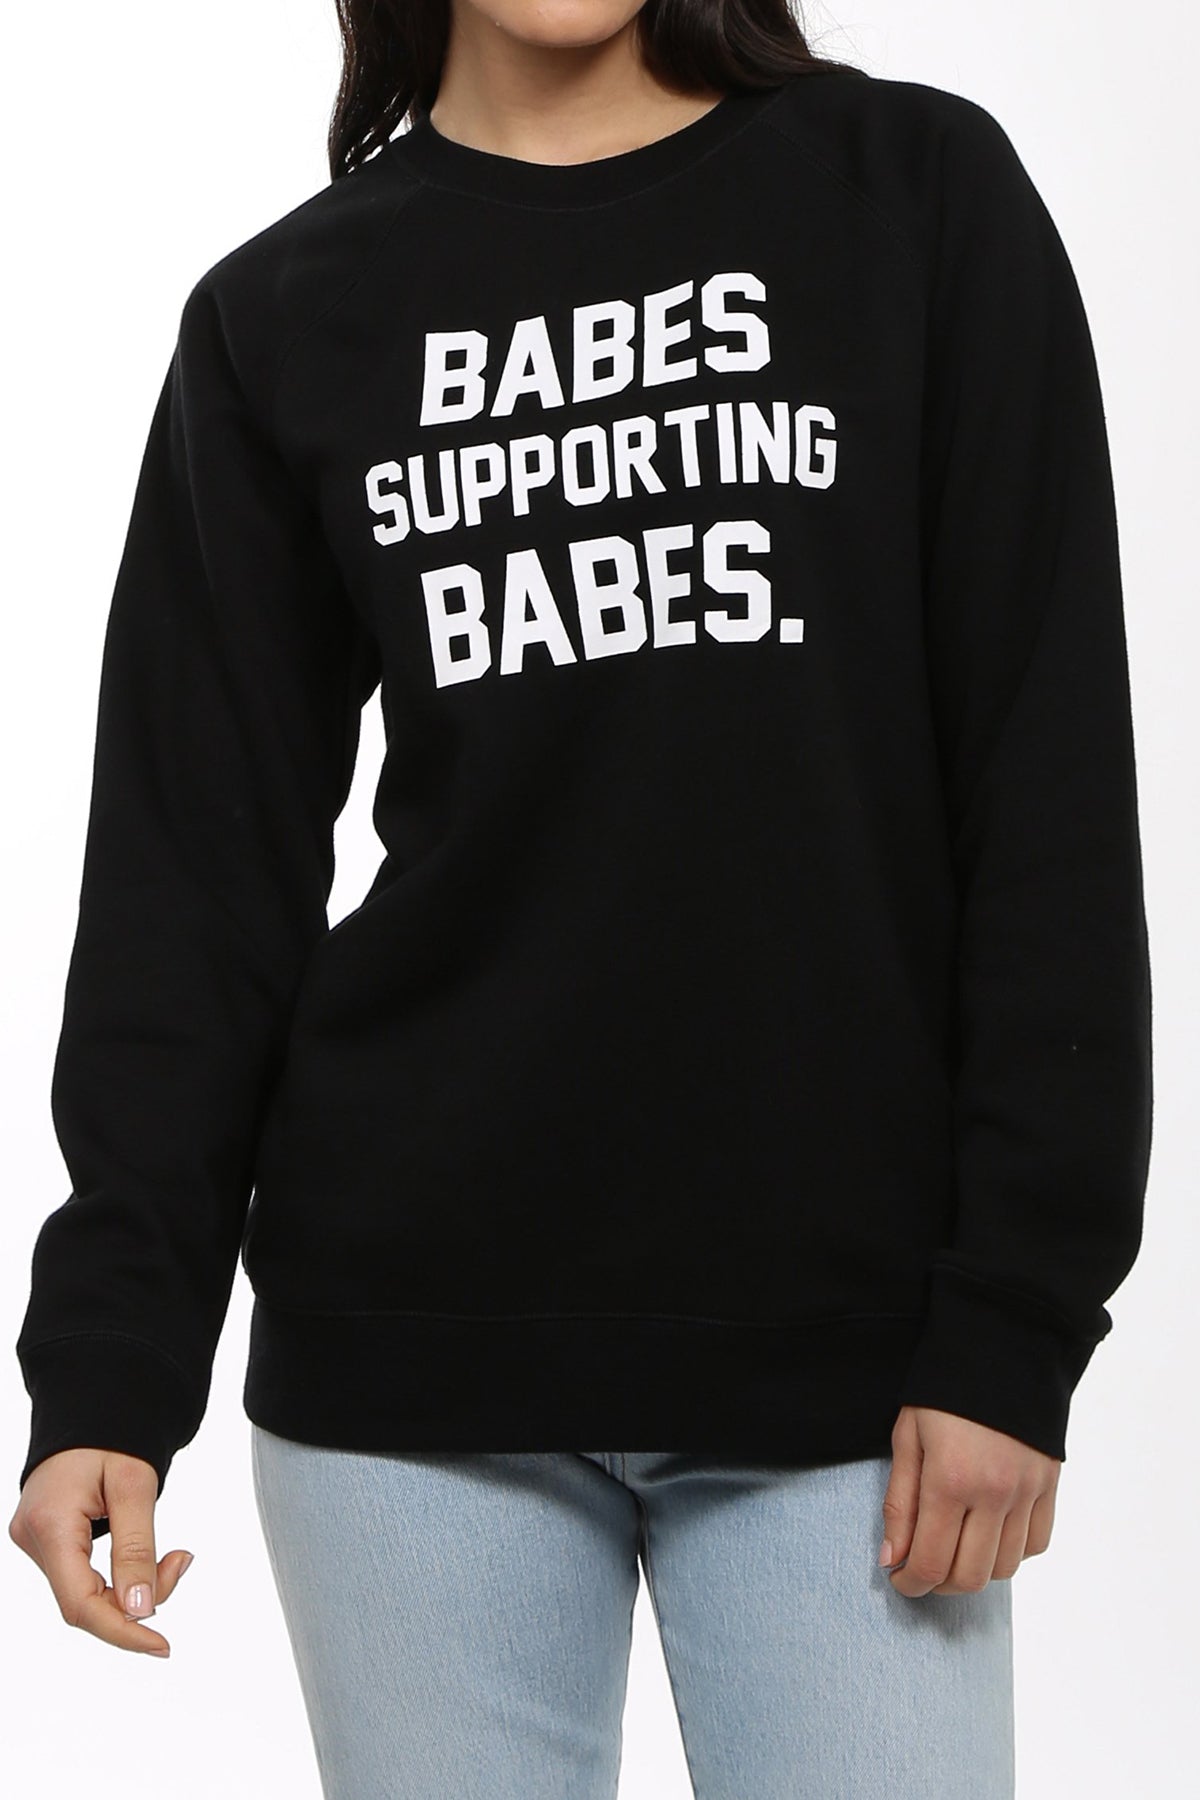 The "Babes Supporting Babes" Classic Crew Neck Sweatshirt | Black